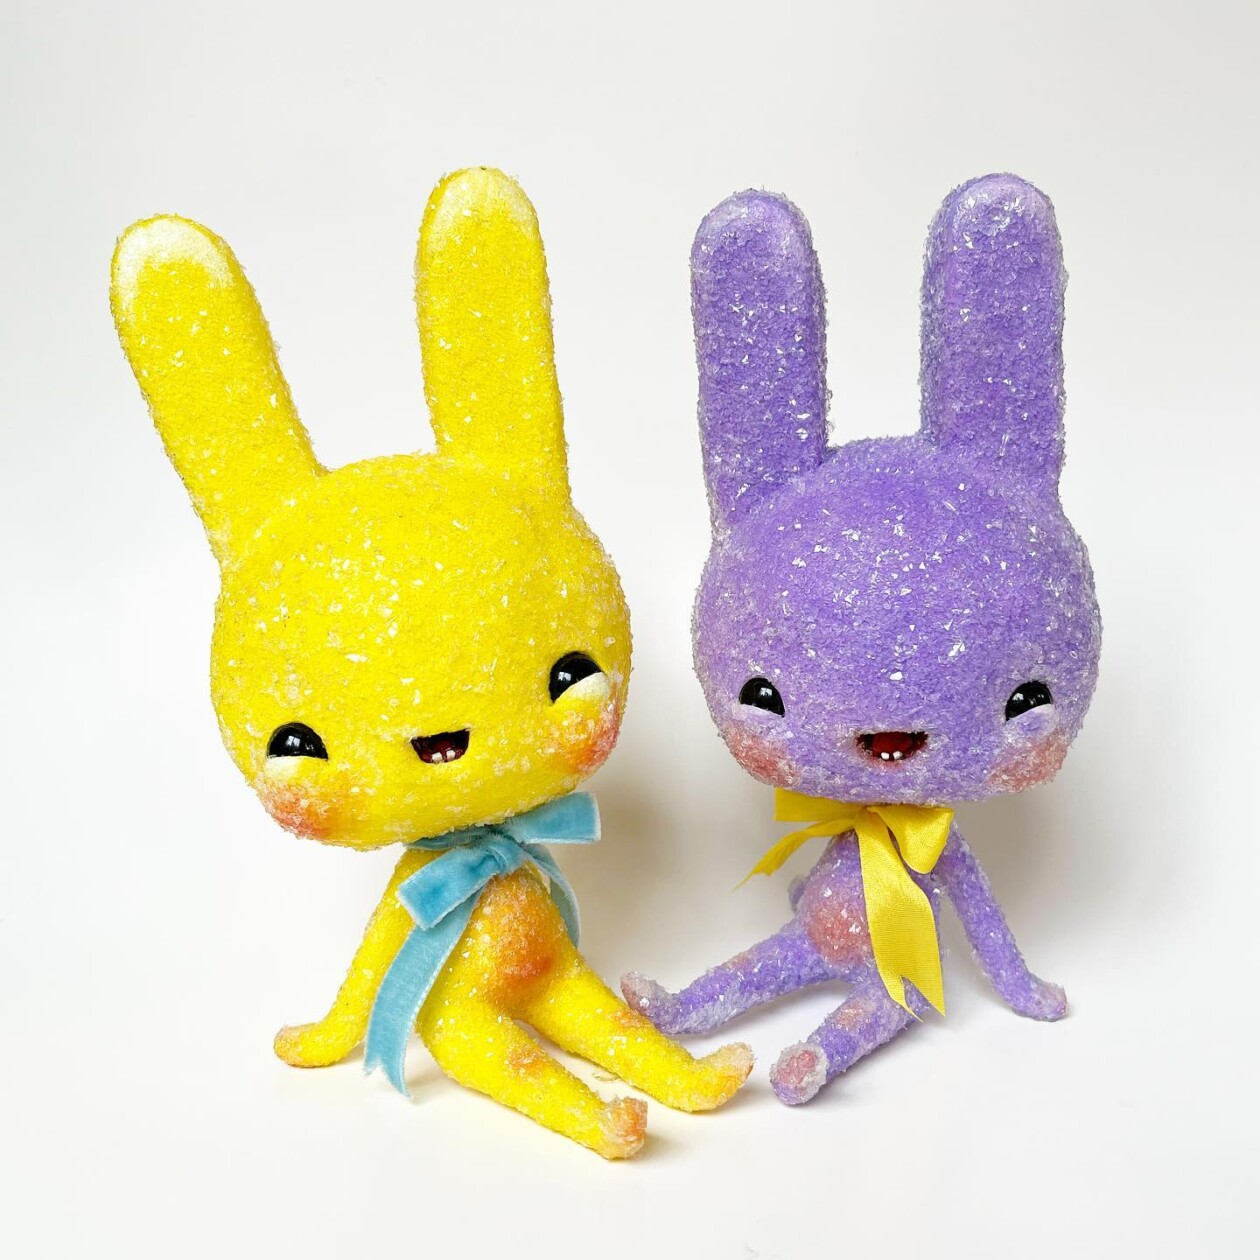 Cute And Creepy Little Monster Toys By Sara Duarte (19)